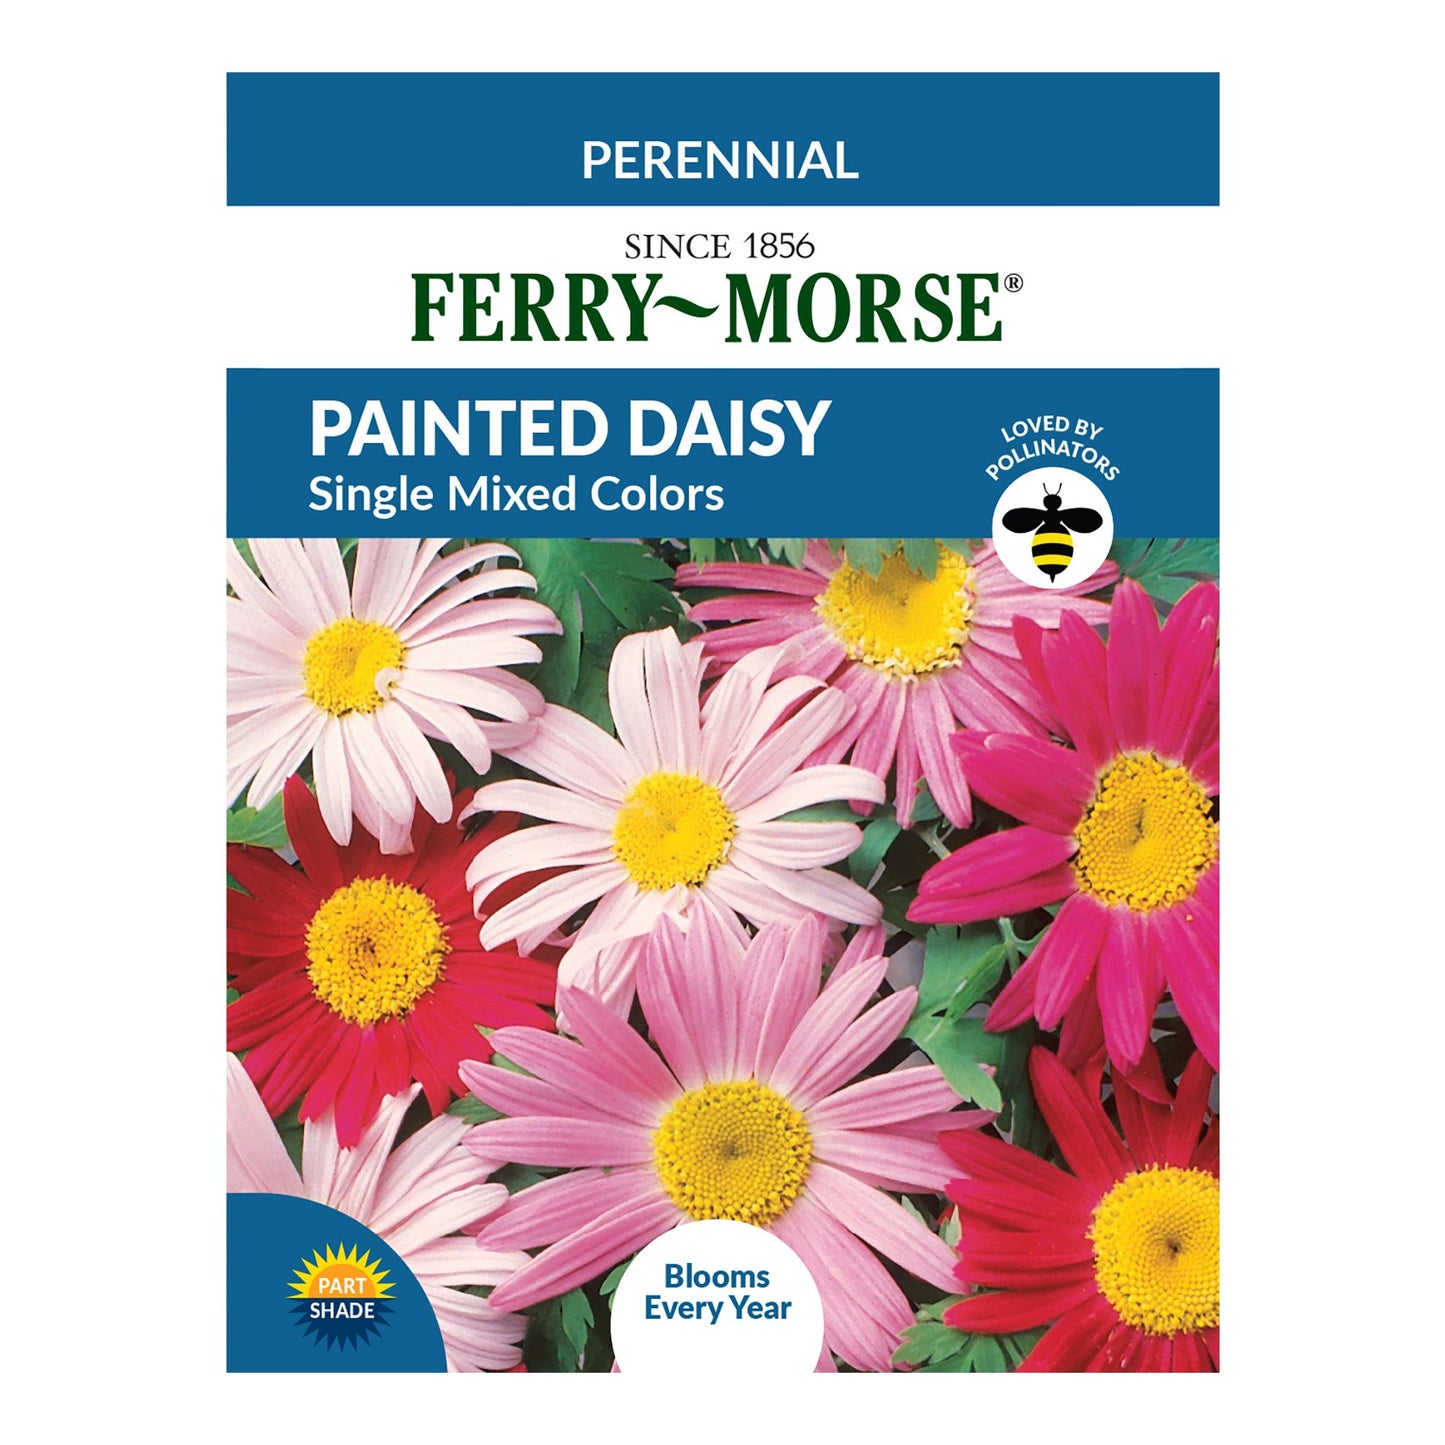 Painted Daisy, Single Mixed Colors  Seeds